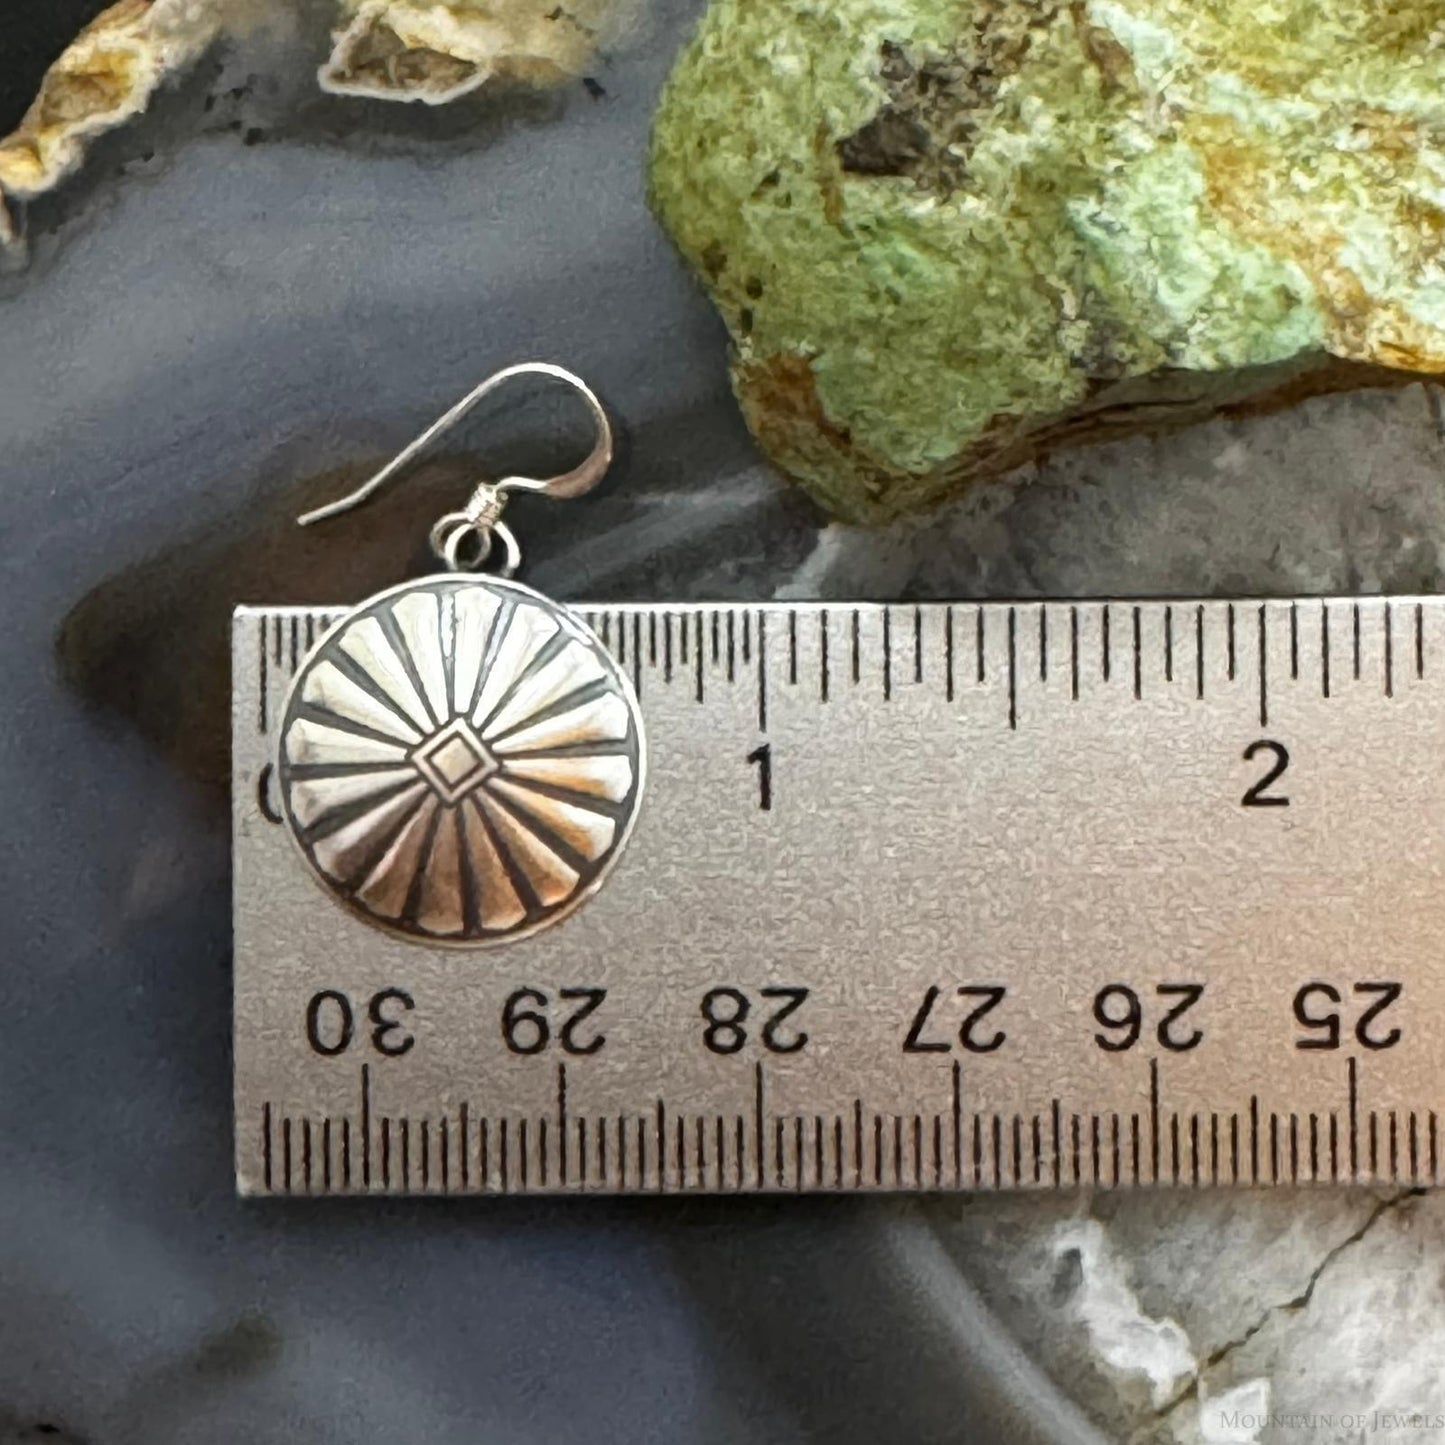 Native American Sterling Silver Sunburst Round Concho Stamped Dangle Earrings For Women